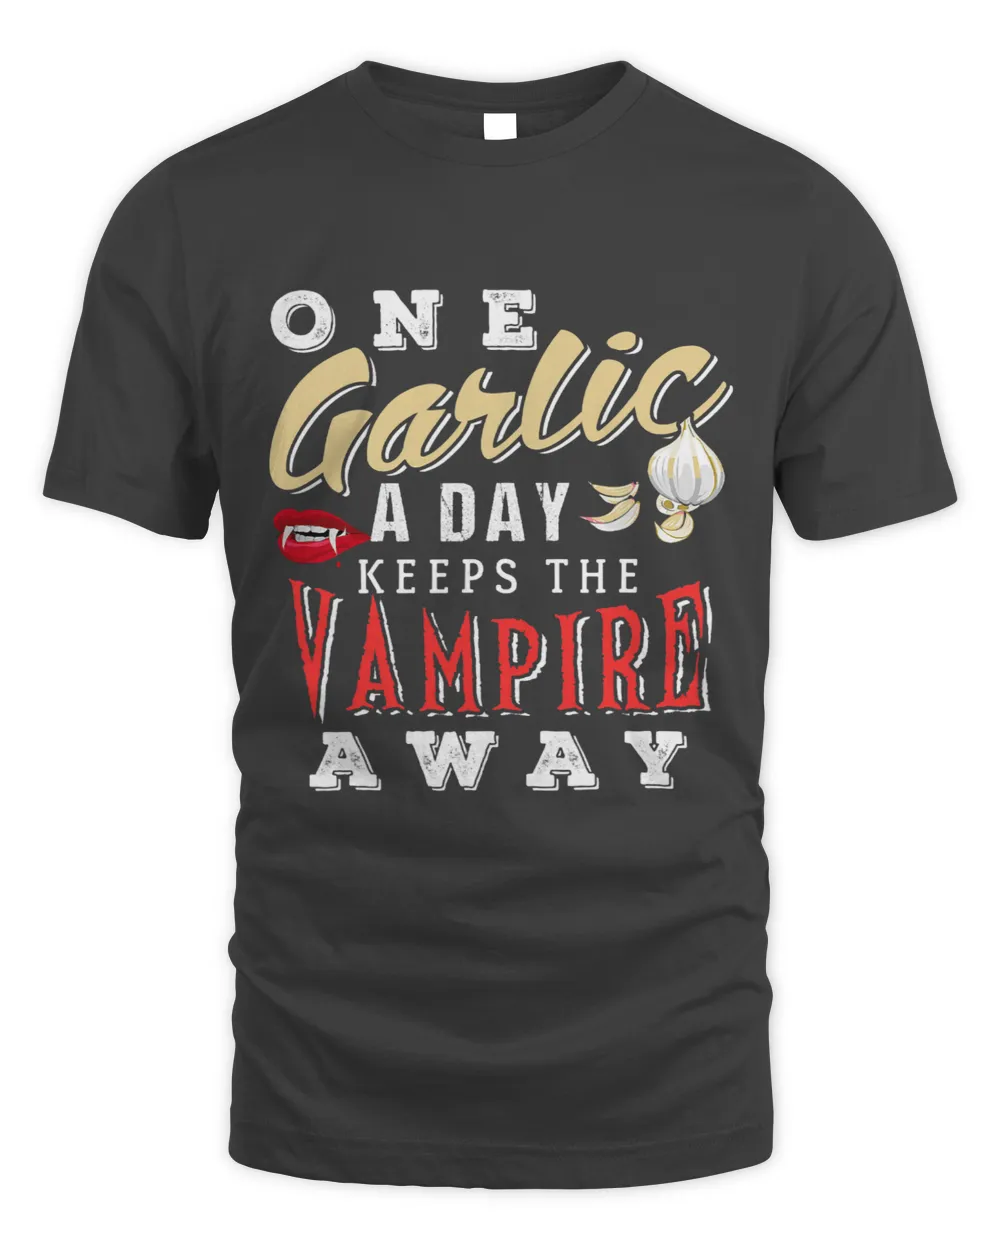 One Garlic A Day Keeps The Vampire Away Design For Halloween